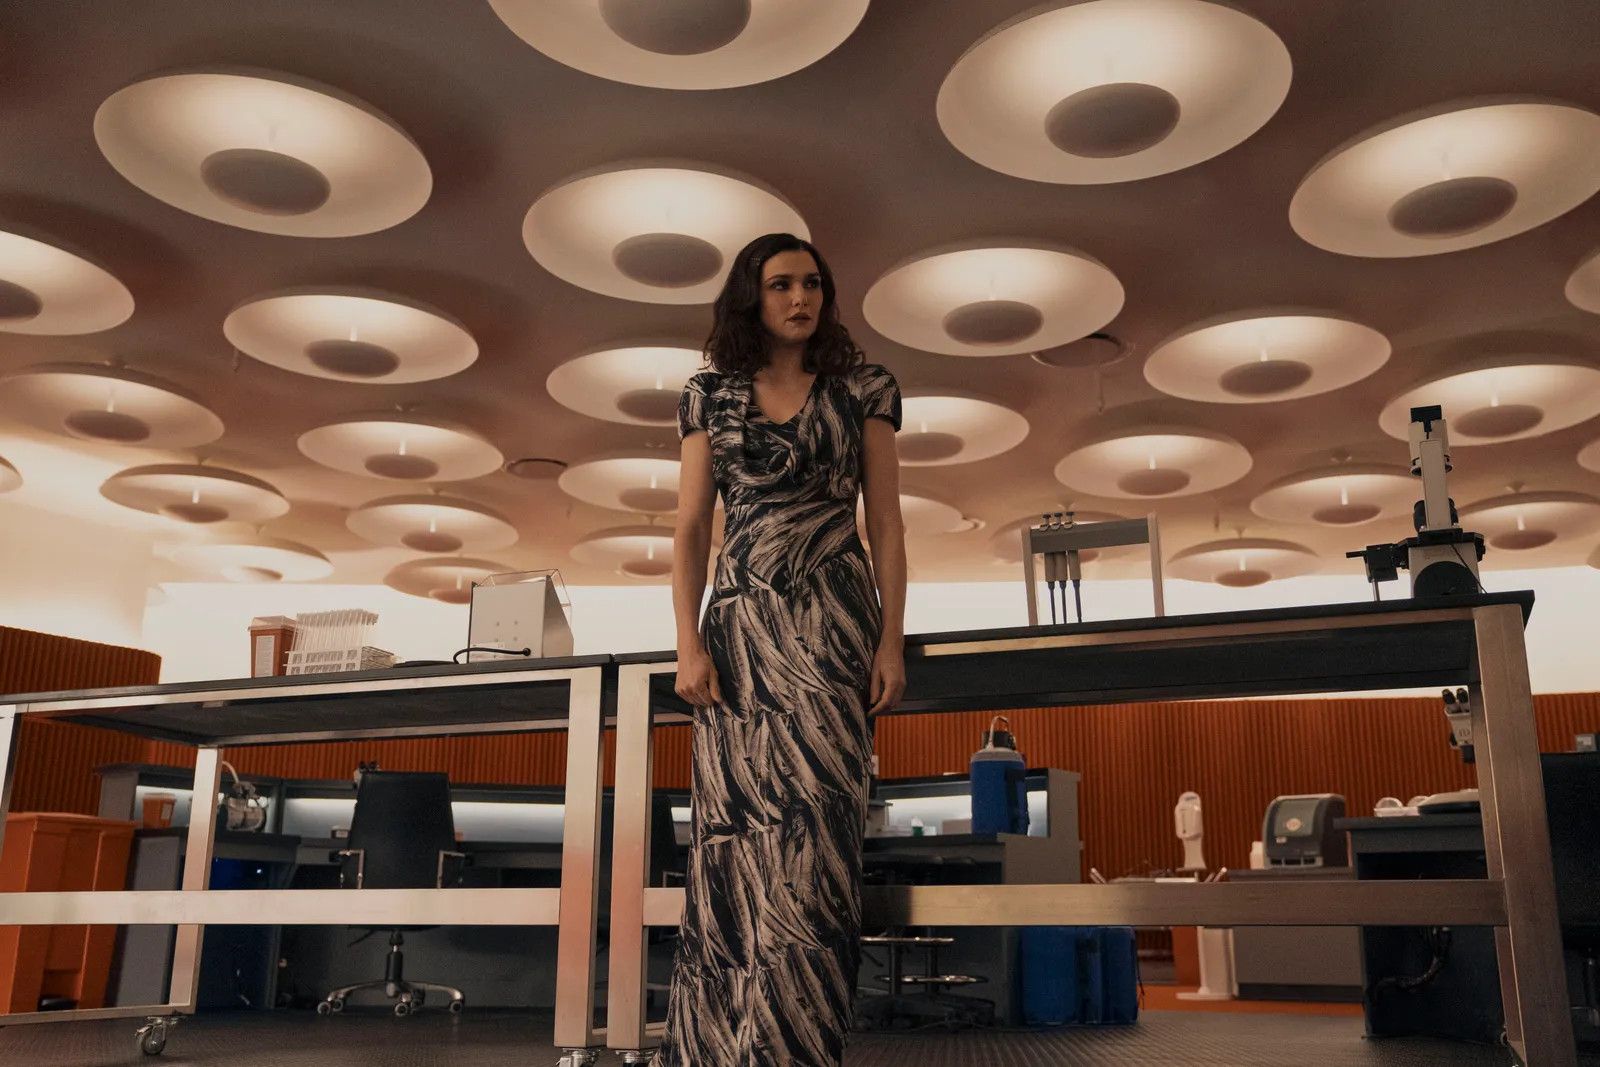 Rachel Weisz in Dead Ringers in a bold print dress standing against a table in a retro-futurist room